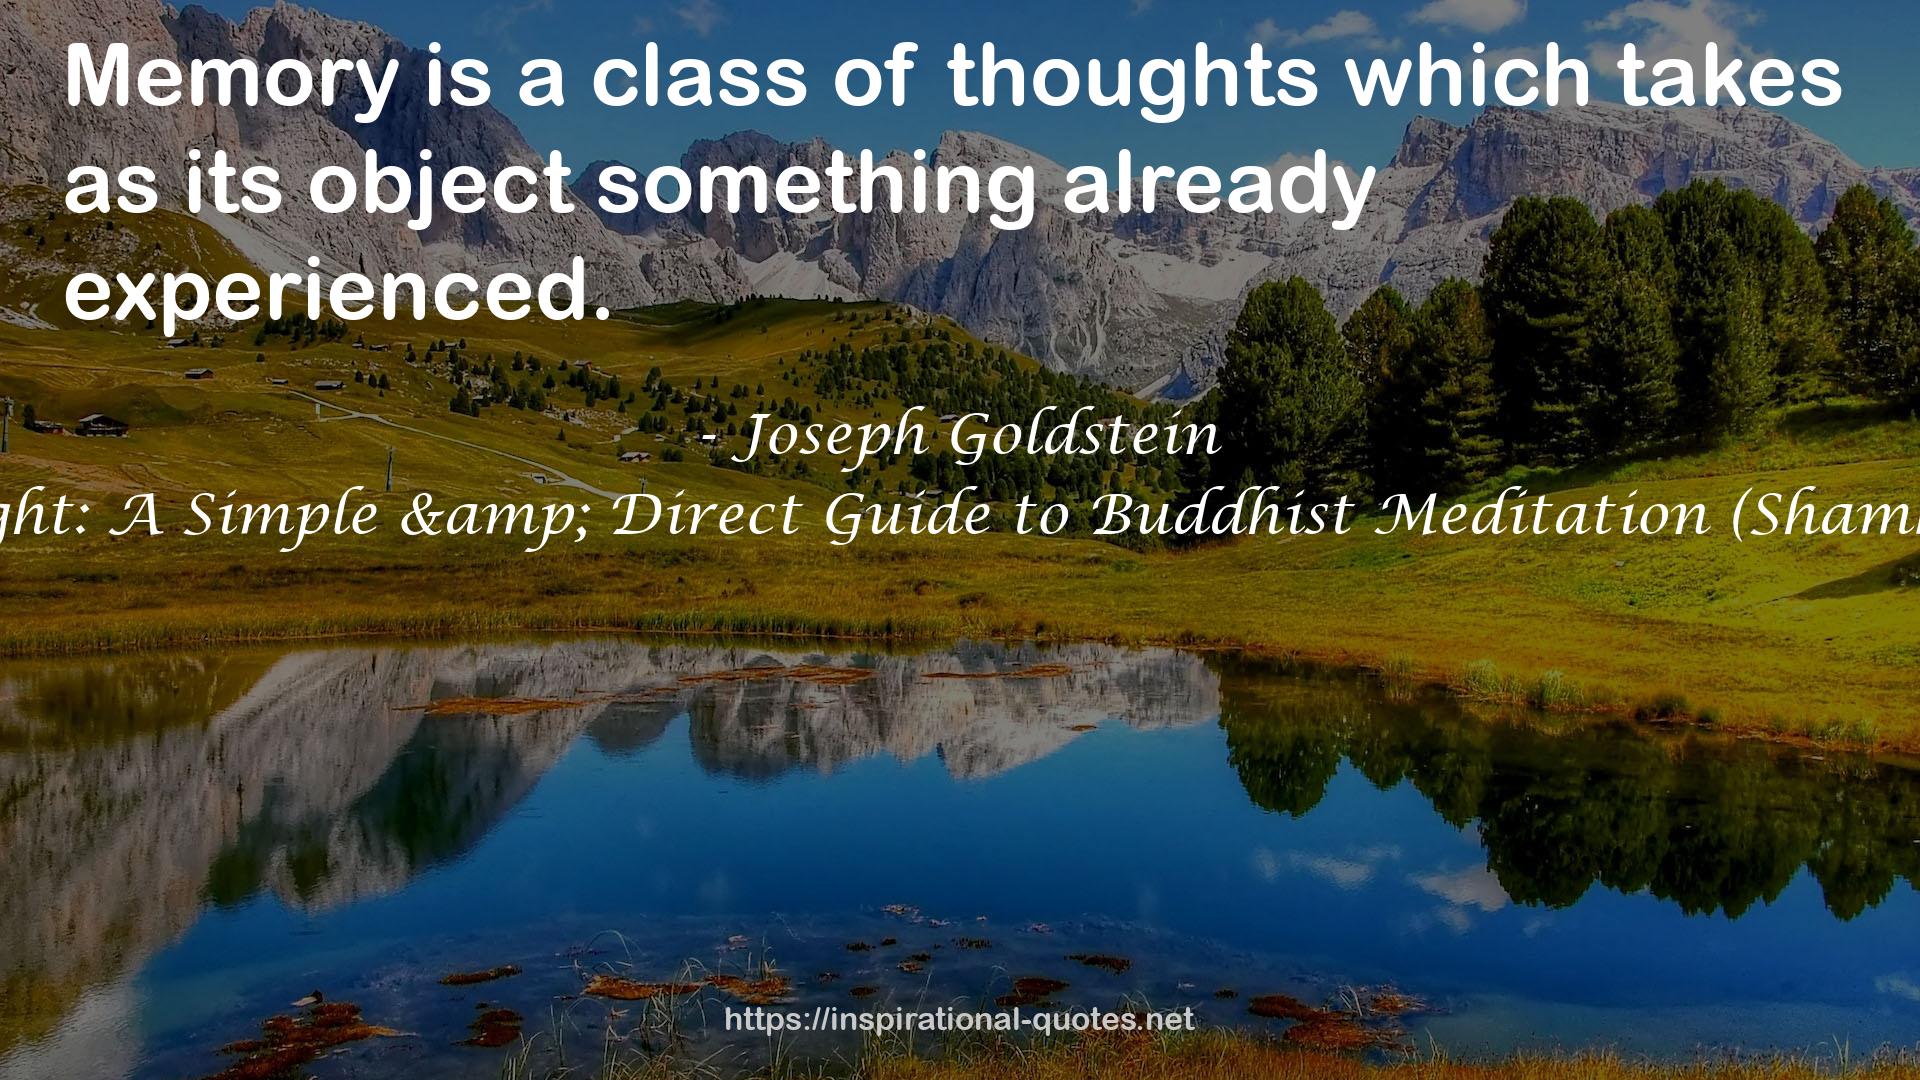 The Experience of Insight: A Simple & Direct Guide to Buddhist Meditation (Shambhala Dragon Editions) QUOTES